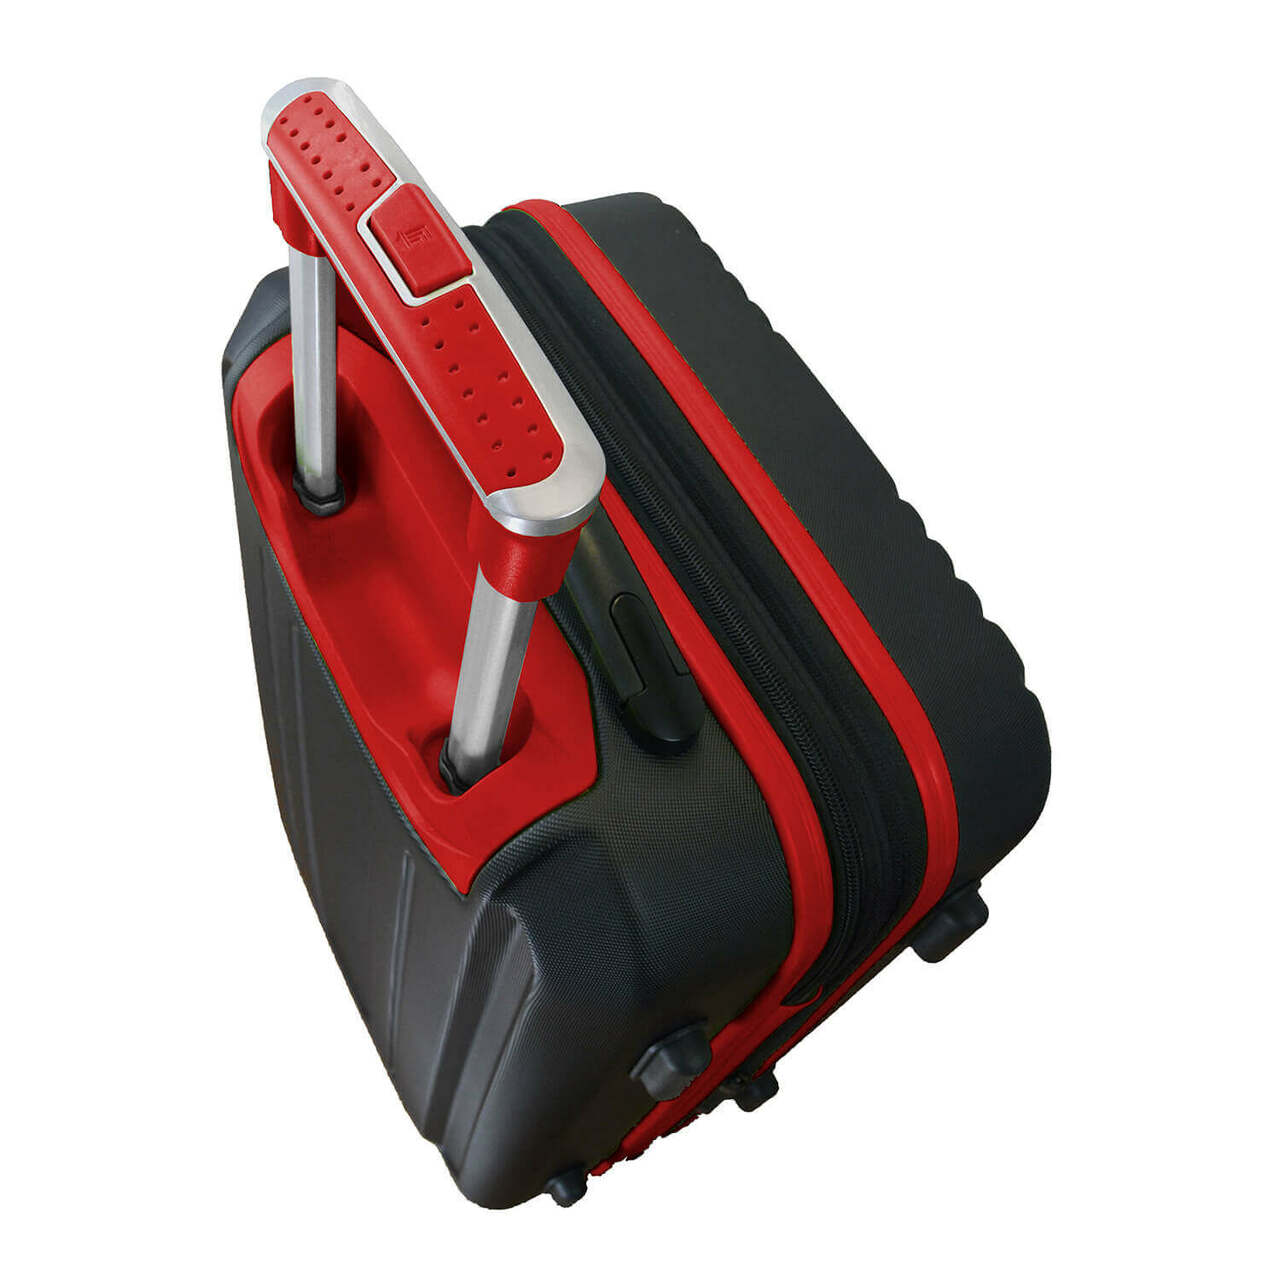 Team USA Carry On Spinner Luggage | Olympics Team USA Hardcase Two-Tone Luggage Carry-on Spinner in Red